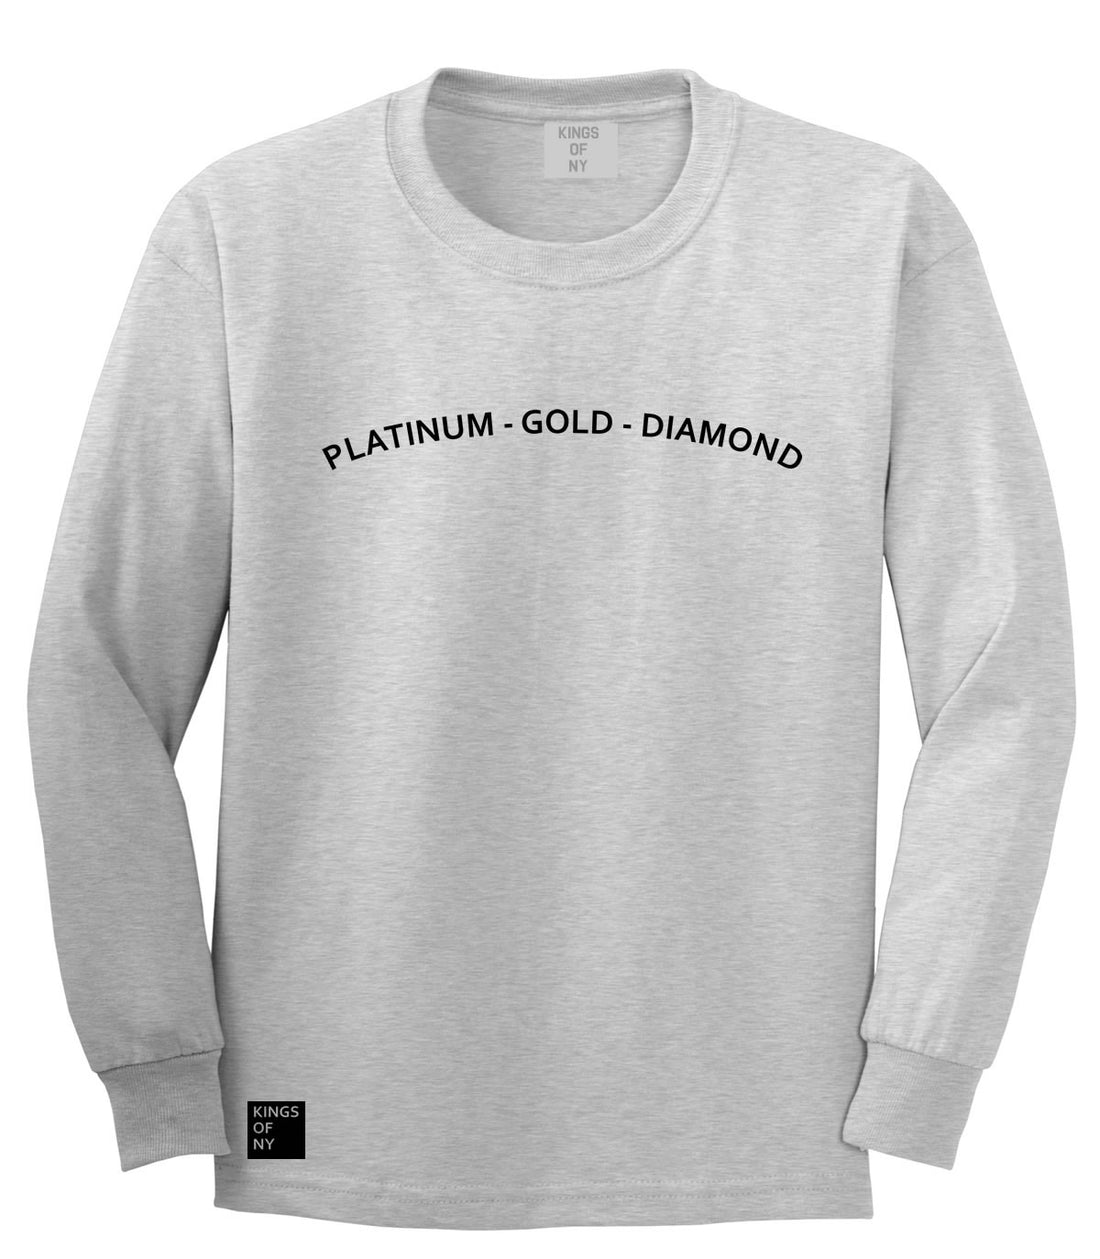 Platinum Gold Diamond Long Sleeve T-Shirt in Grey by Kings Of NY